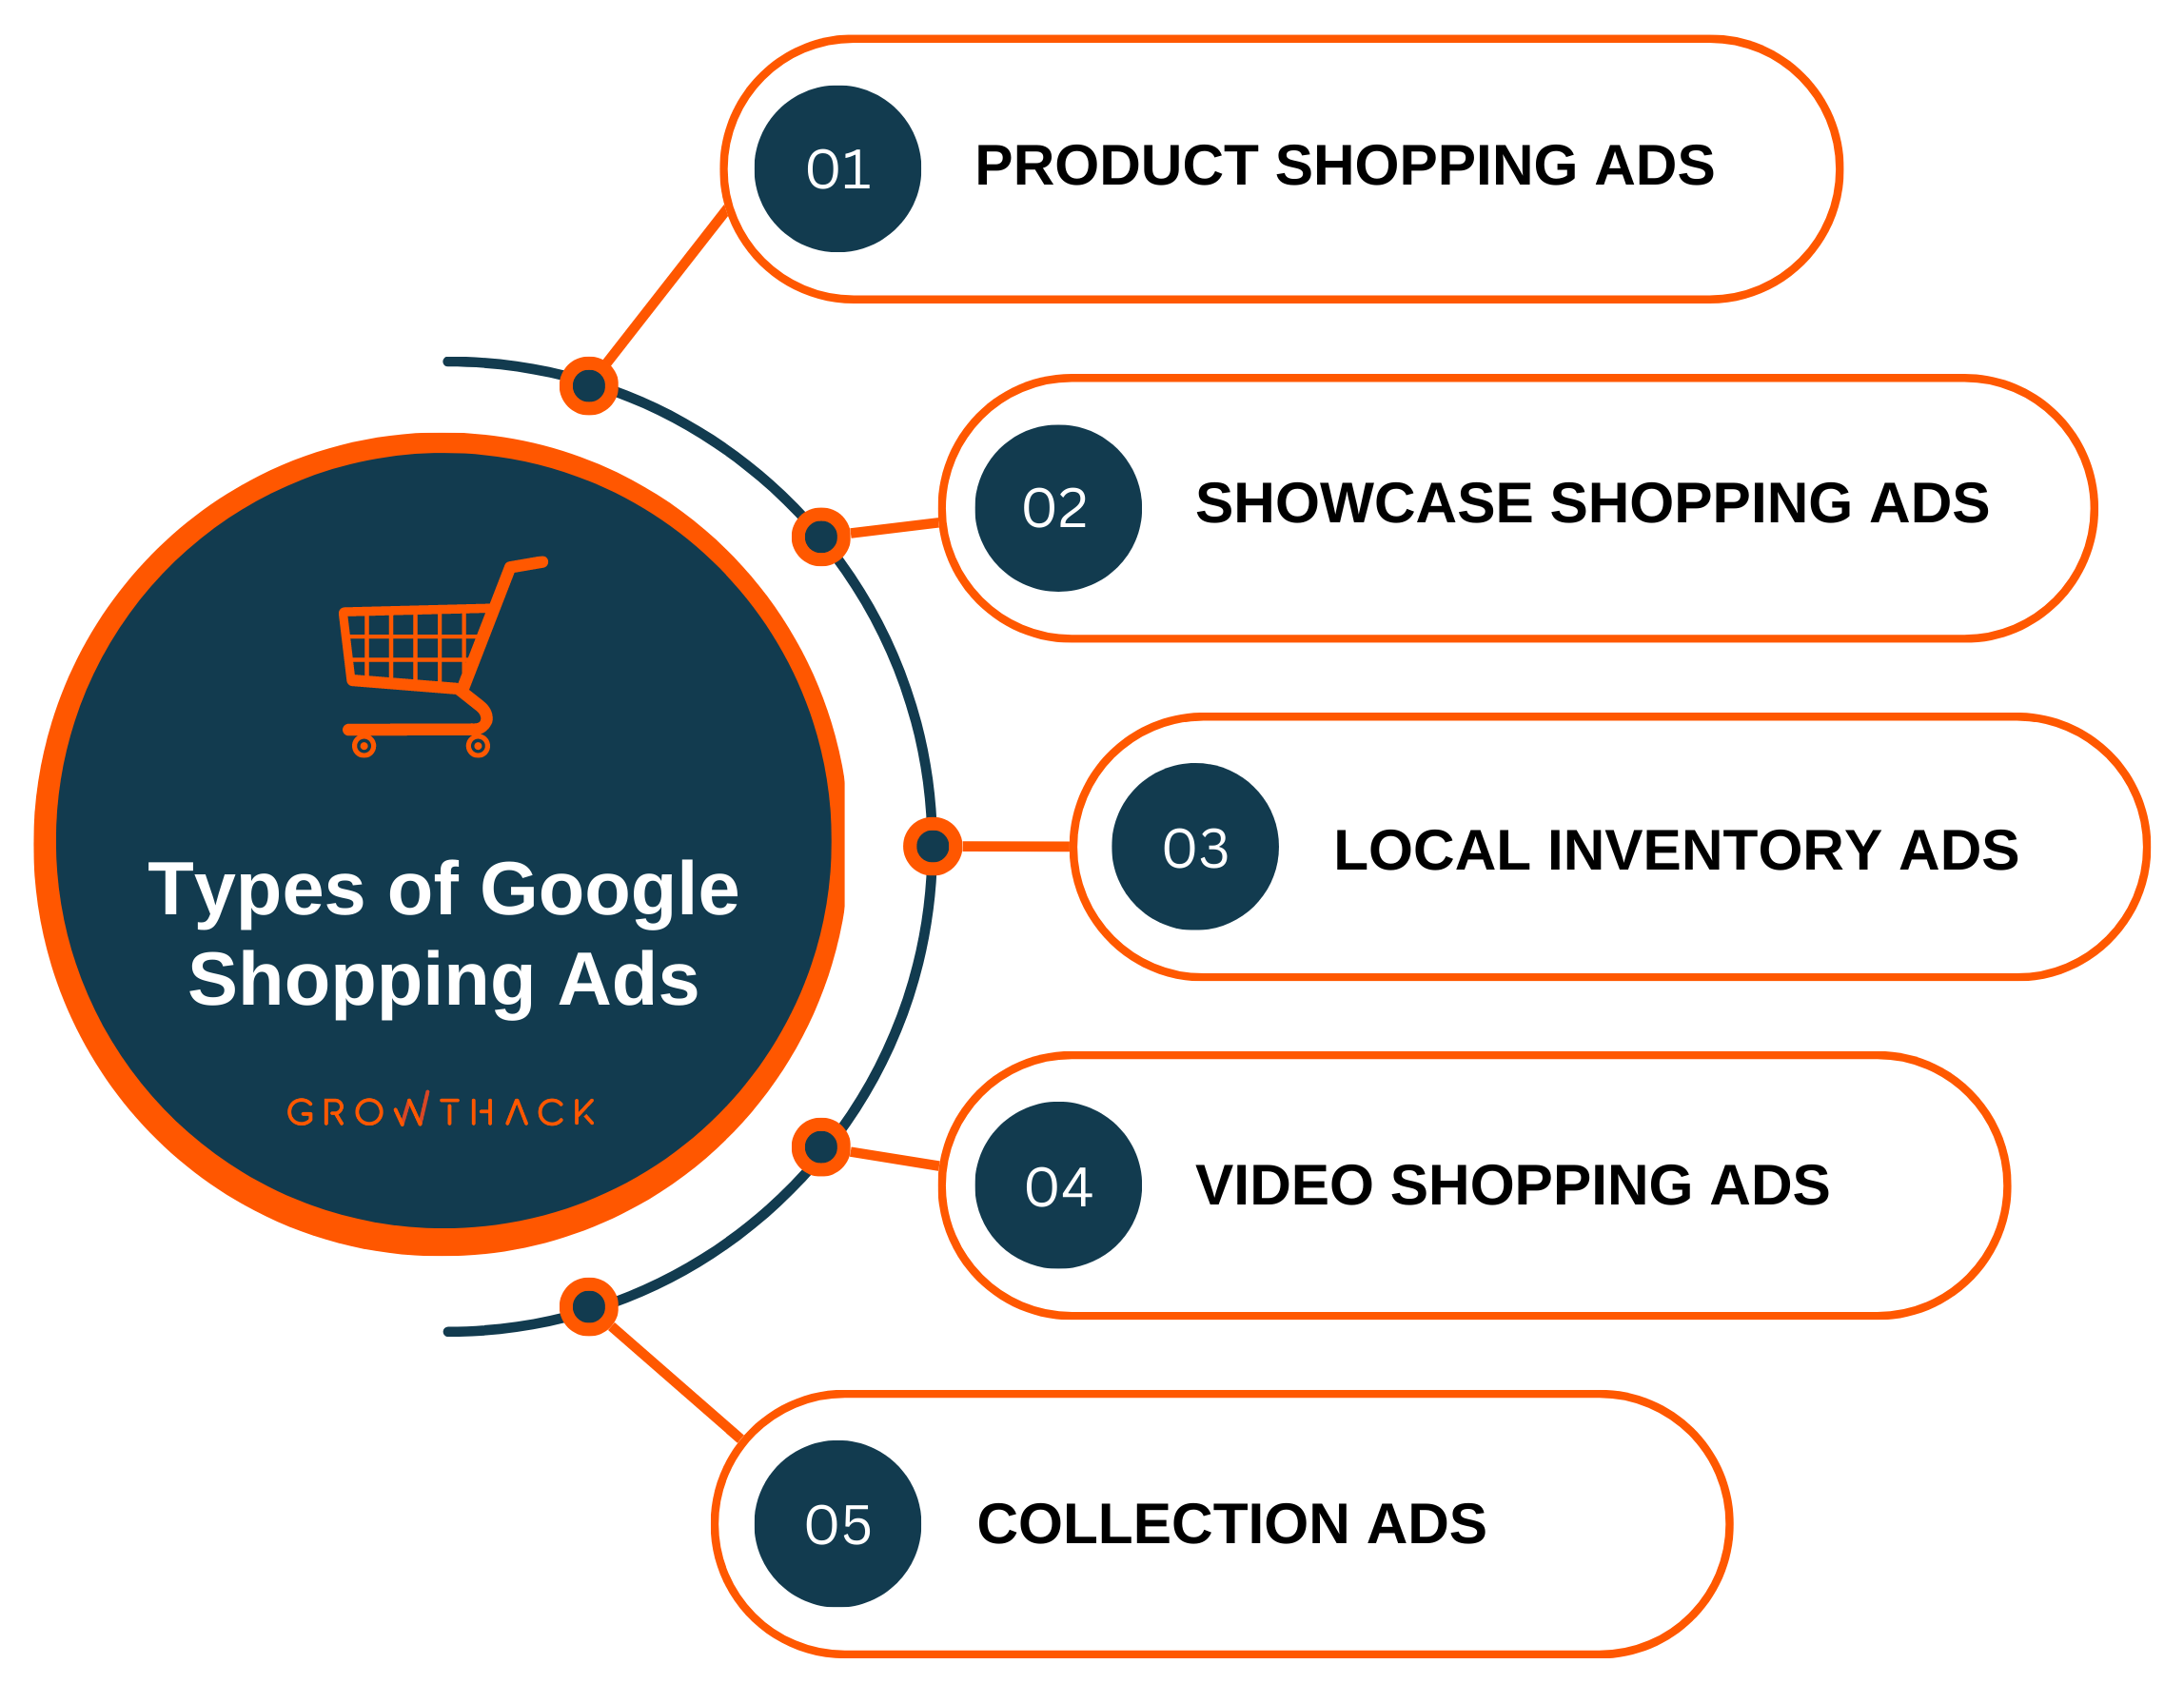 This diagram shows the 5 different types of Google ads that business use to promote their products